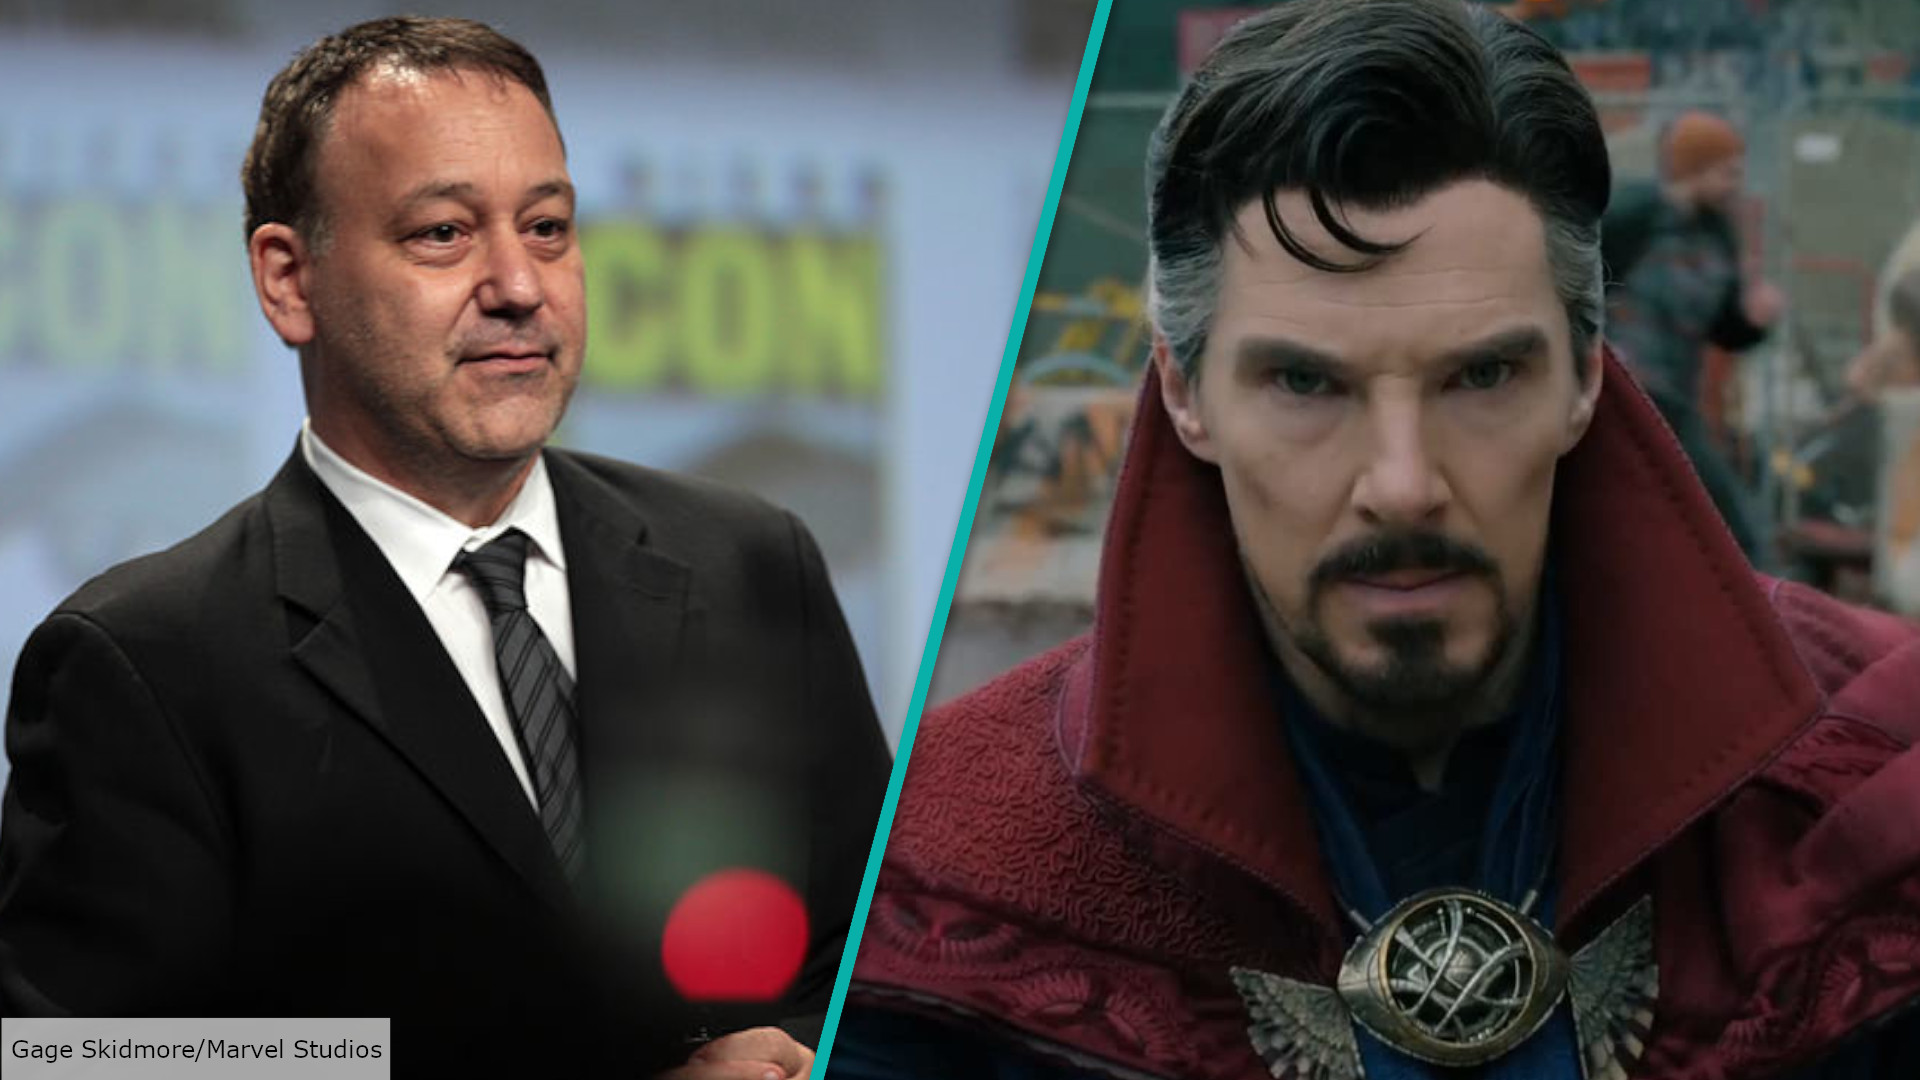 Even Sam Raimi doesn’t know if Doctor Strange 2 has finished filming yet